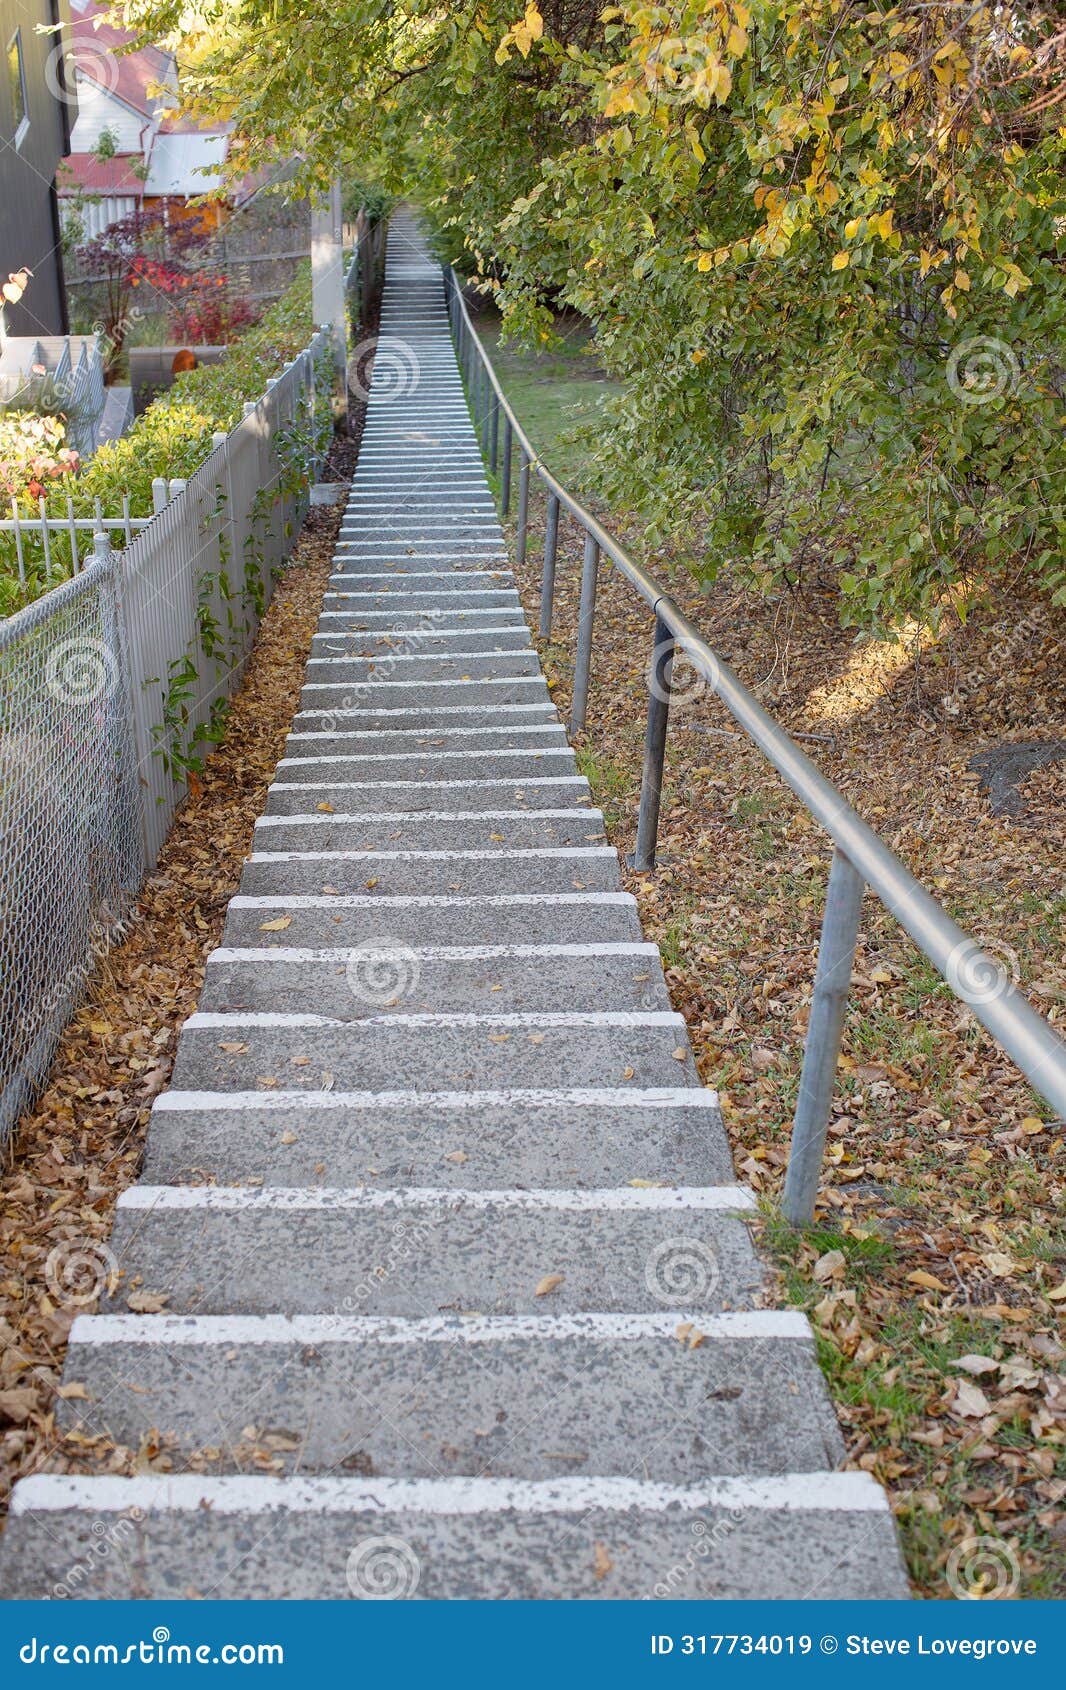 large concrete steps moving up an incline between two streets